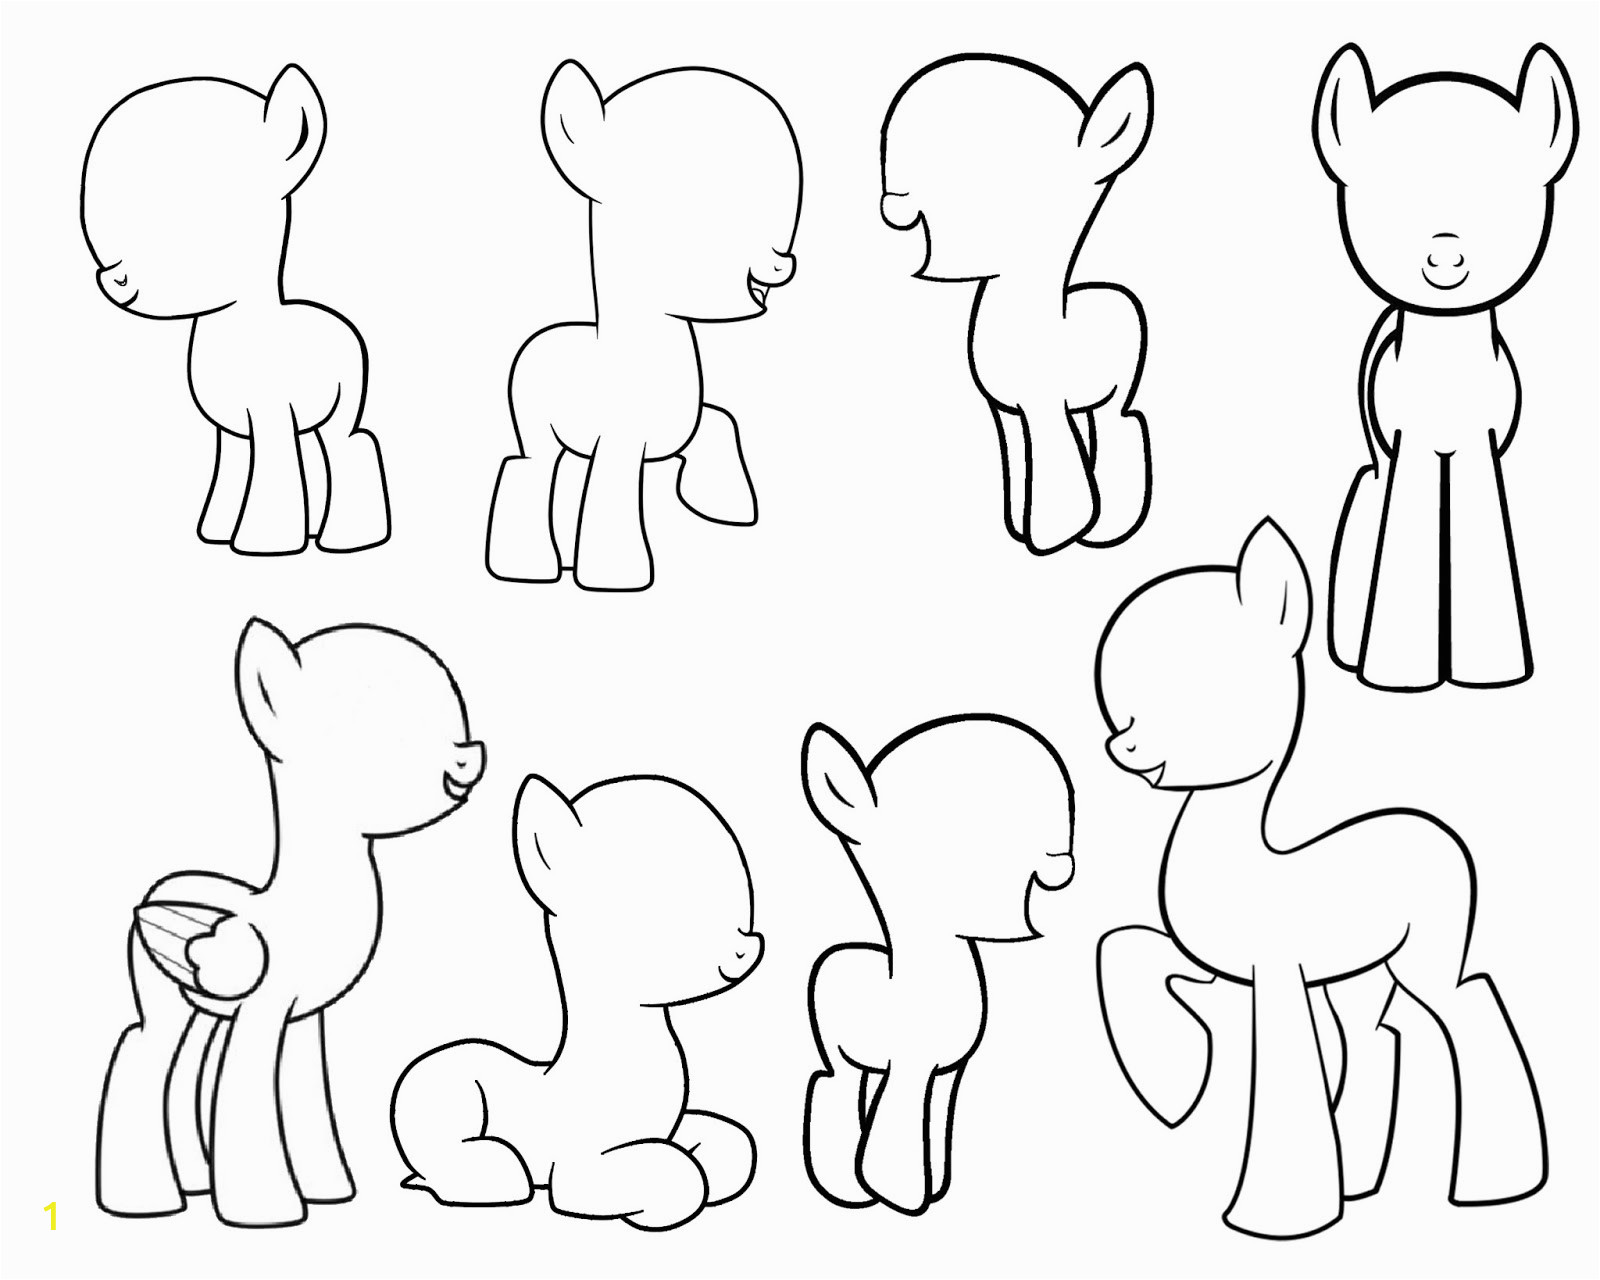 Make Your Own My Little Pony Coloring Pages Doodlecraft Design and Draw Your Own My Little Pony